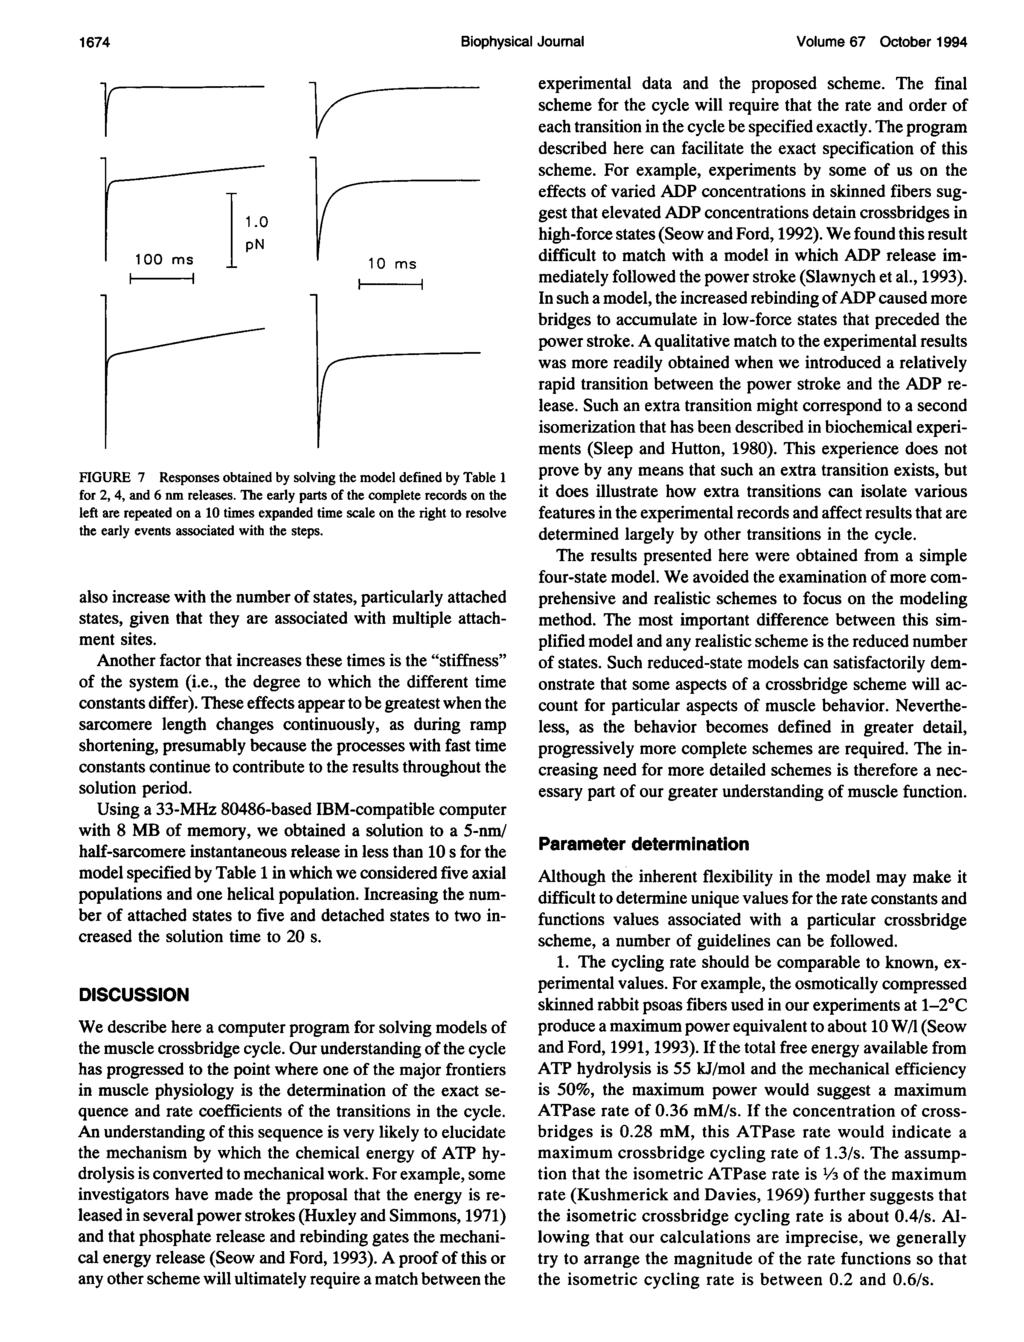 1674 Biophysical Joumal Volume 67 October 1994 1.0/ 100 ms 10 ms FIGURE 7 Responses obtained by solving the model defined by Table 1 for 2, 4, and 6 nm releases.